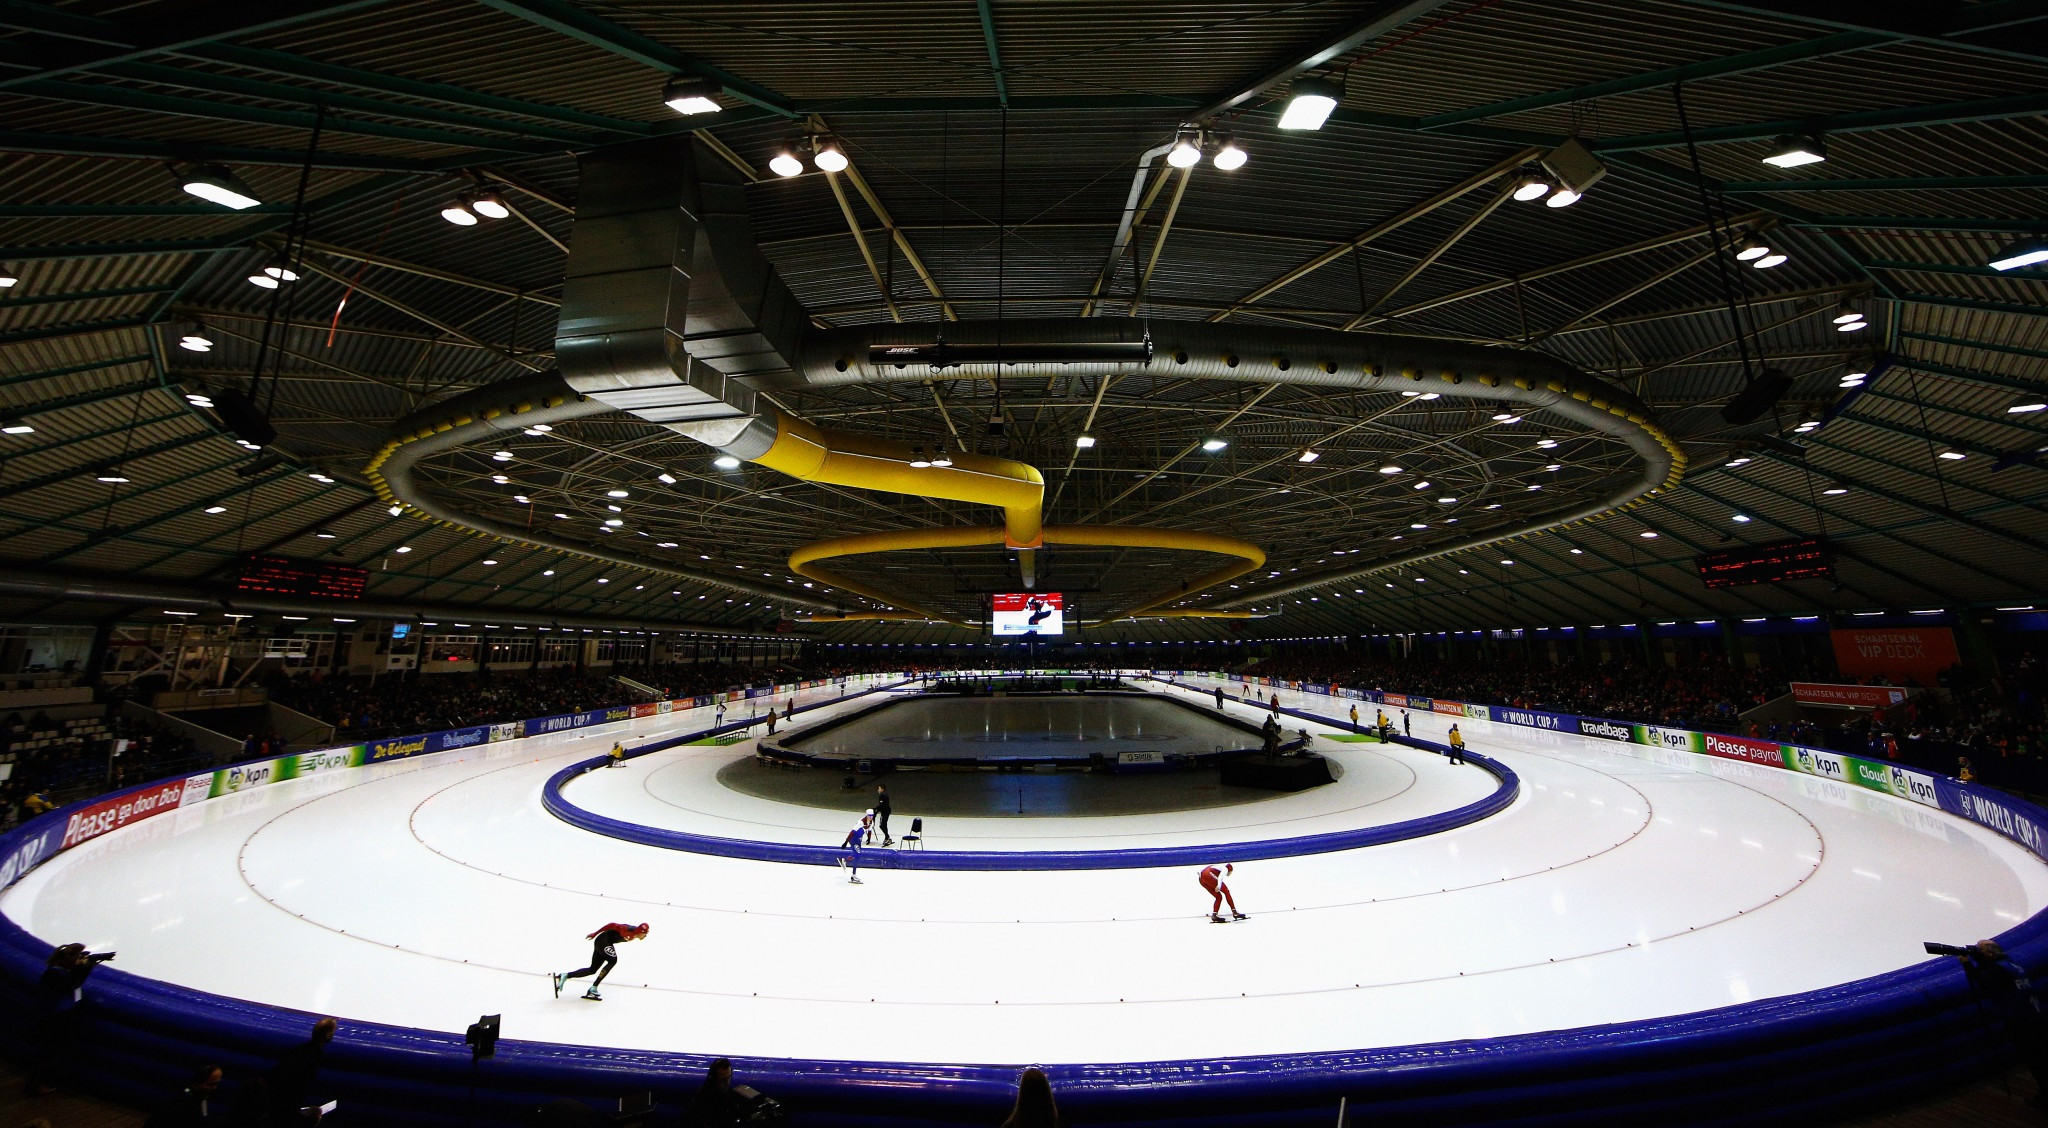 Heerenveen is set to stage two World Cup events after the European Speed Skating Championships ©Getty Images